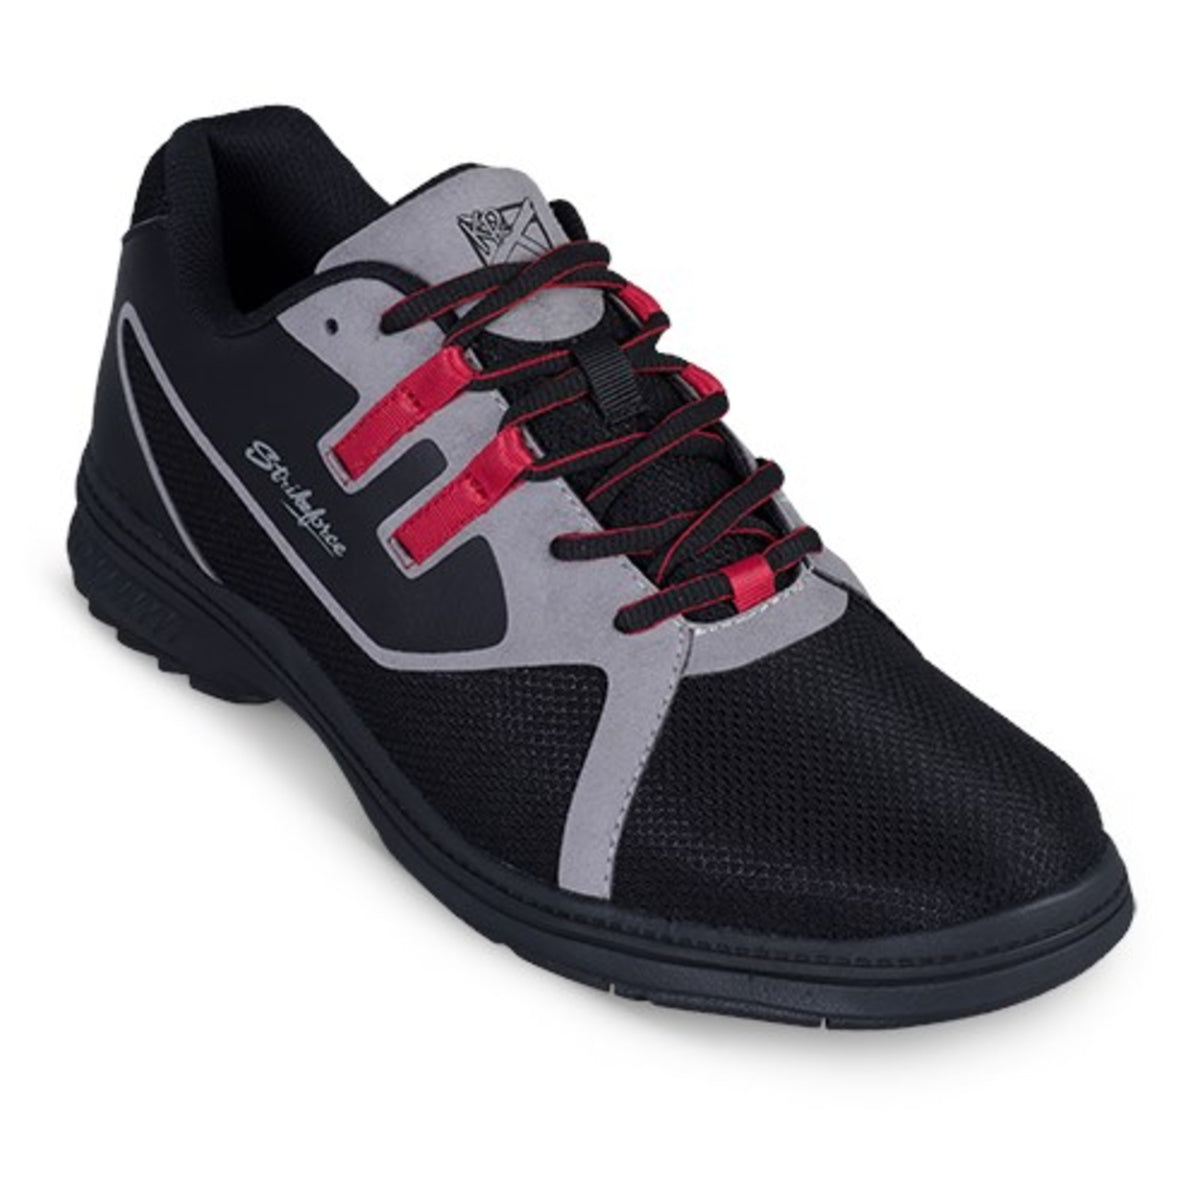 Ignite Black/Grey/Red Wide Shoes